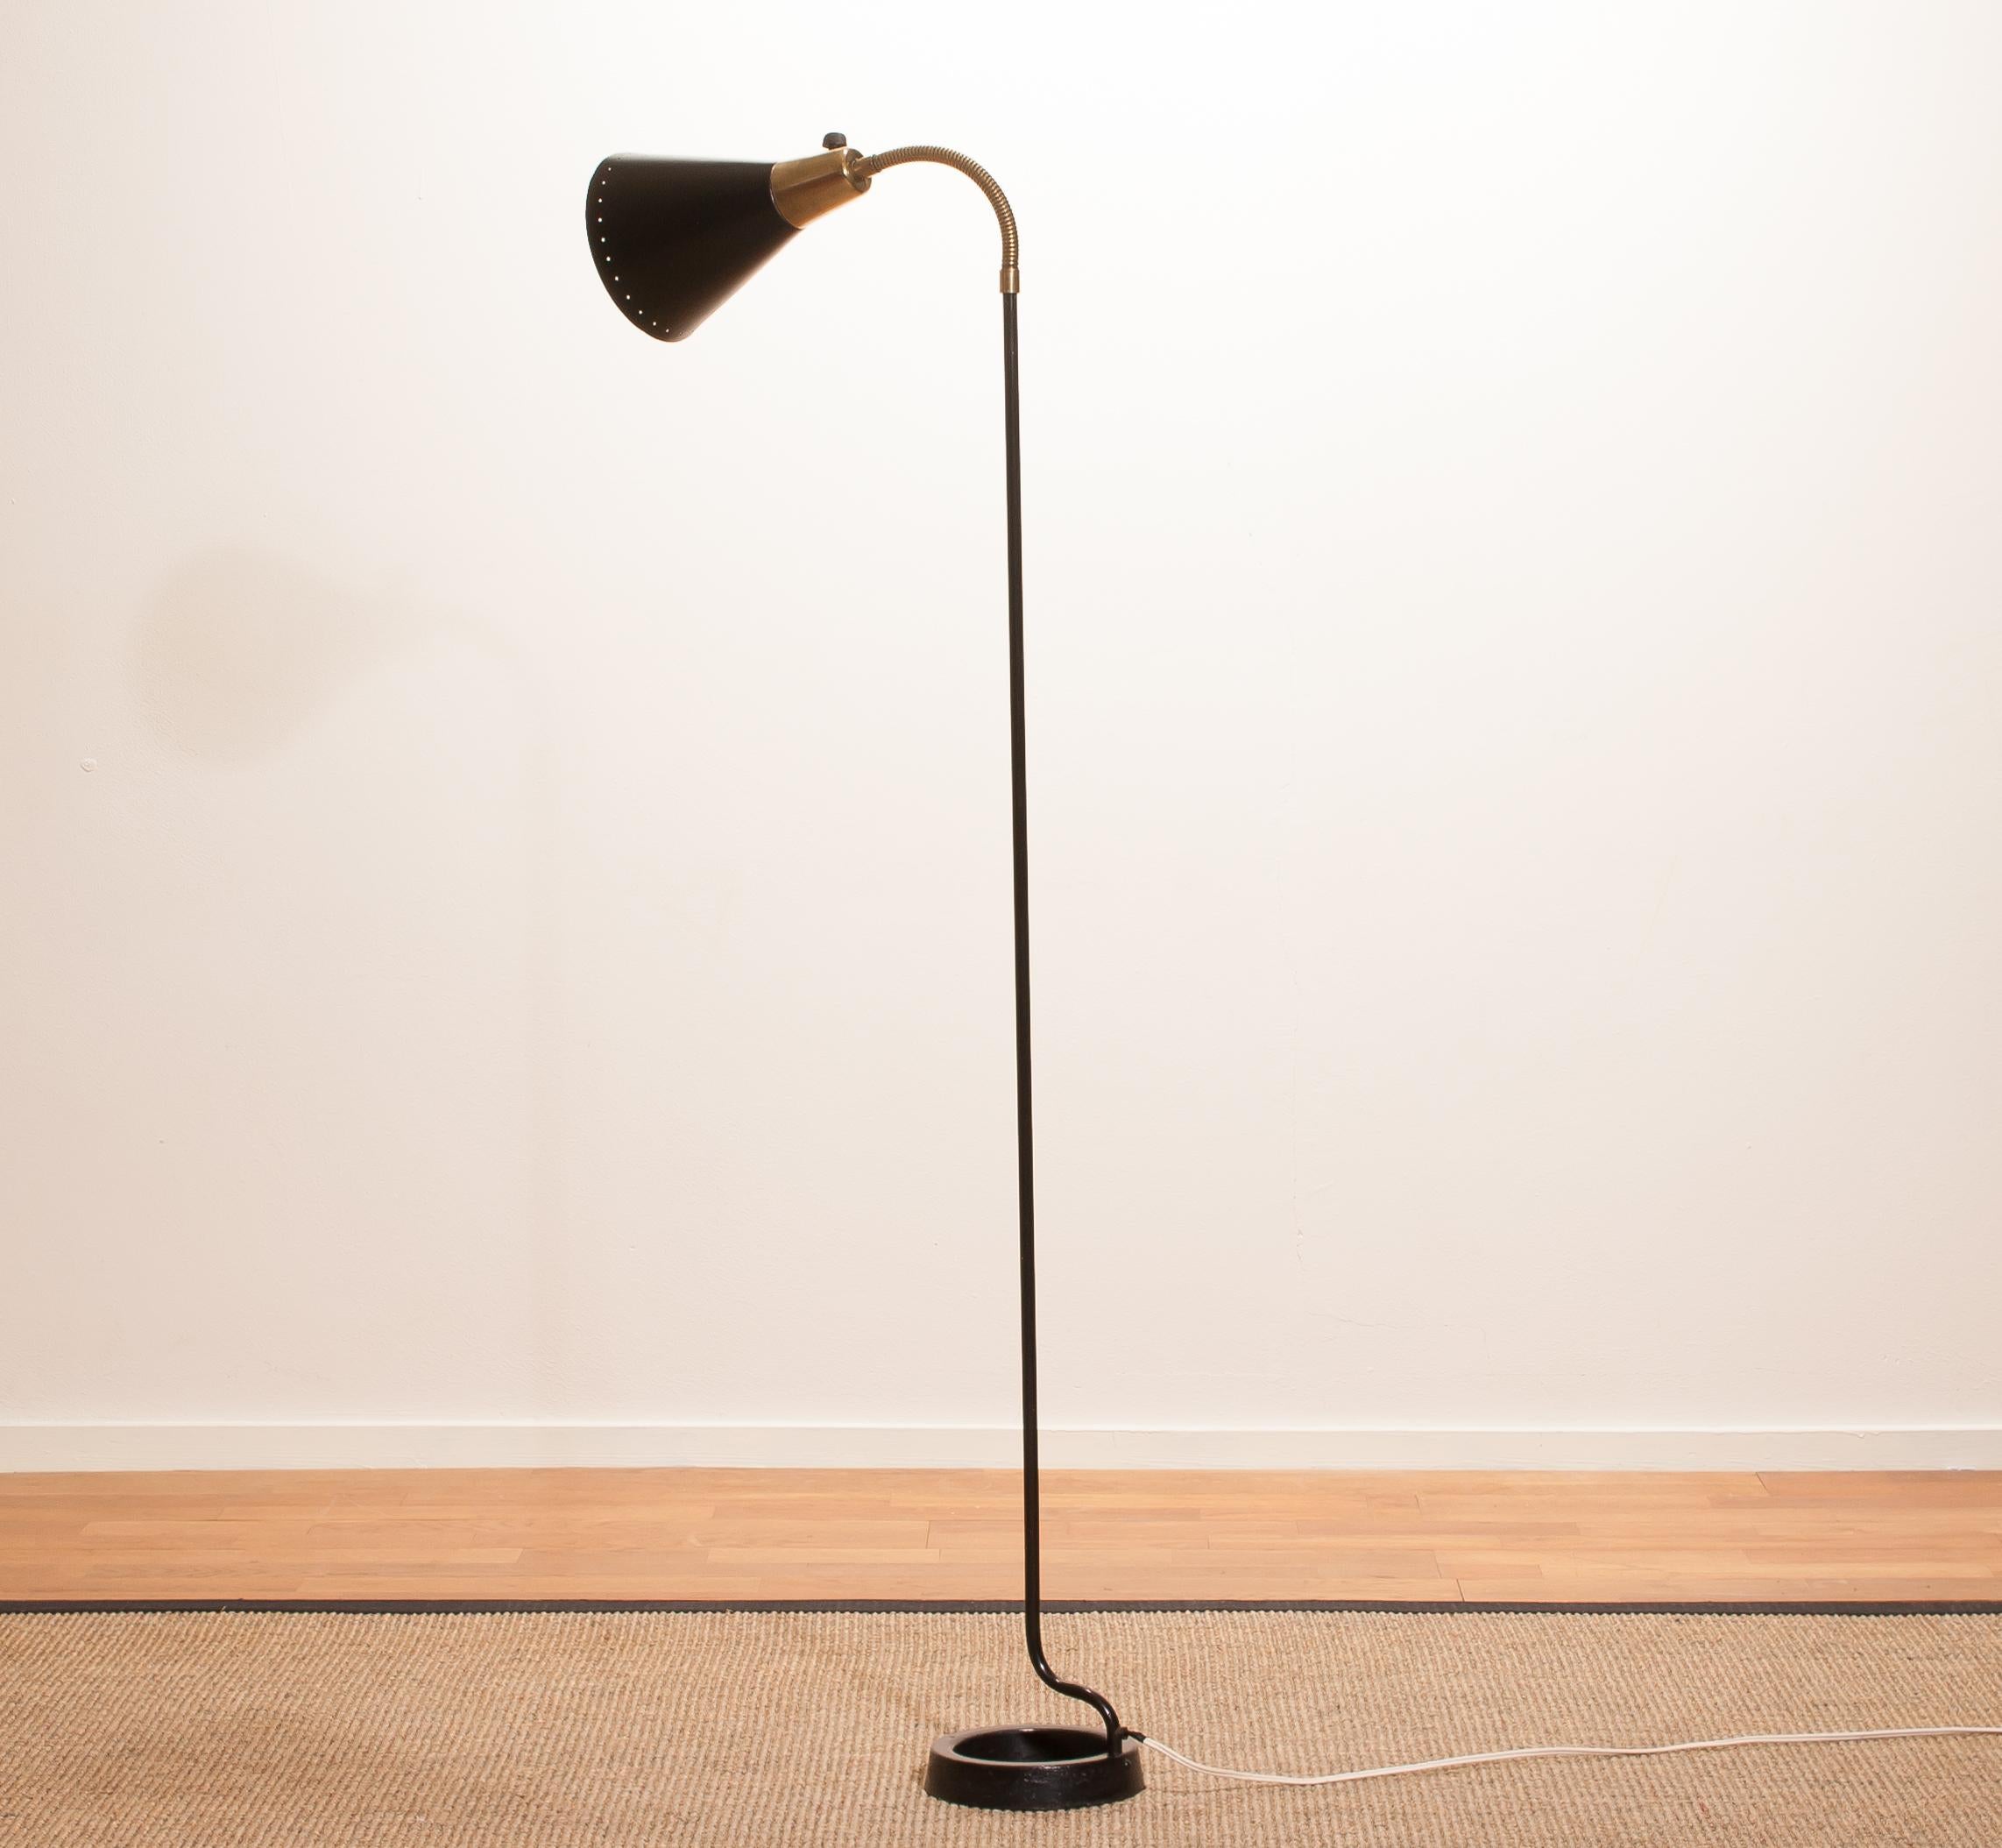 Beautiful floor lamp made in Sweden.
This lamp is made of black metal with brass details and has a very rare Stand.
It has a perforated shade which gives a wonderful shining.
It is in an original and working condition.
Period 1940s
Dimensions